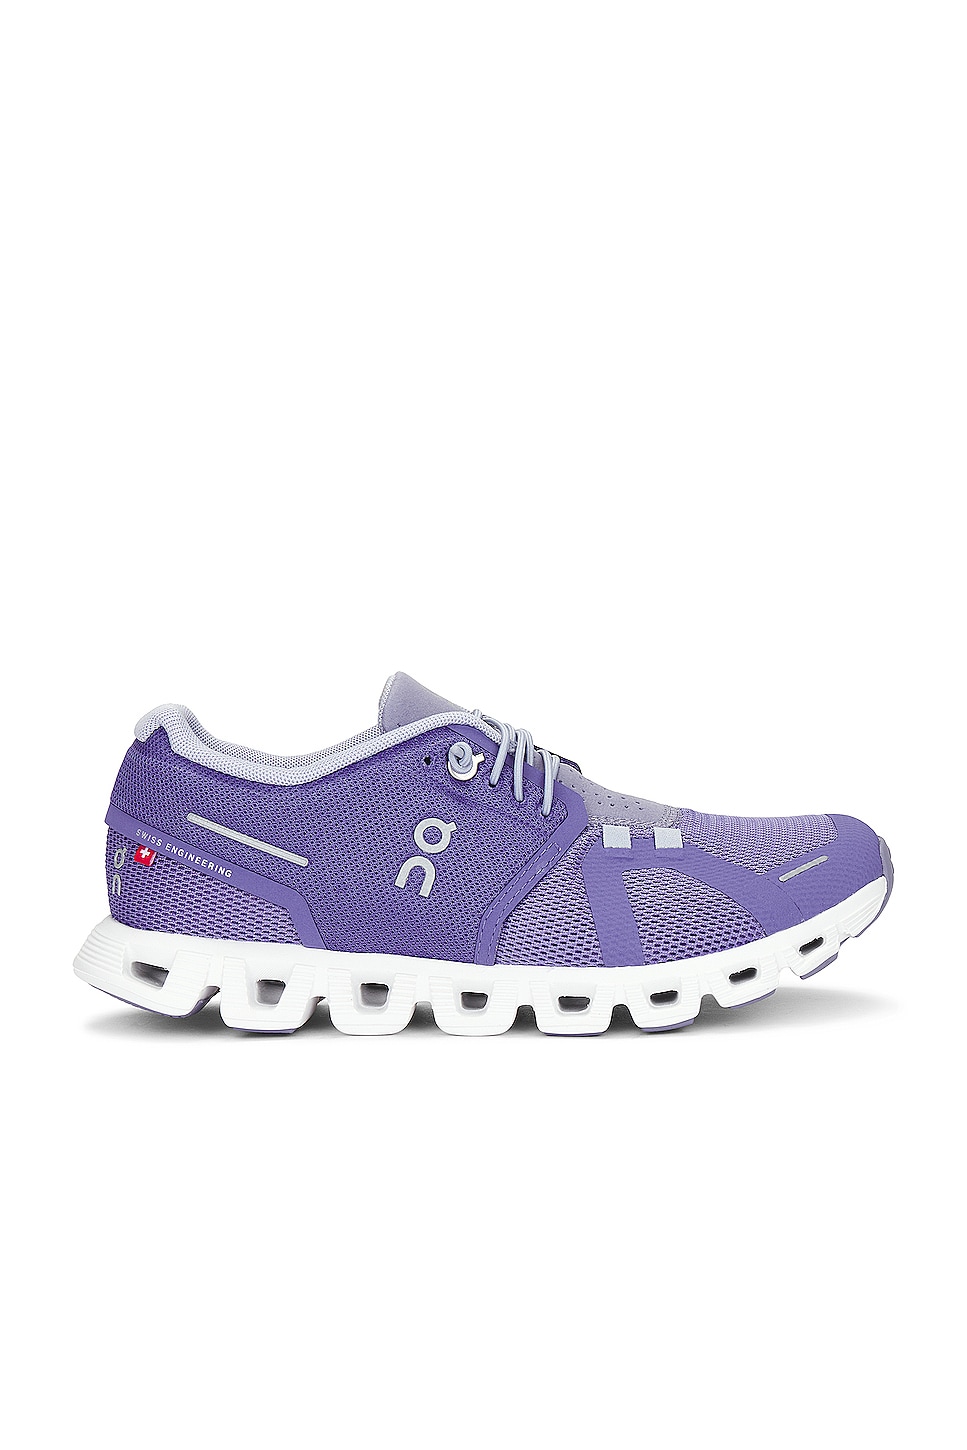 Image 1 of On Cloud 5 Sneaker in Blueberry & Feather